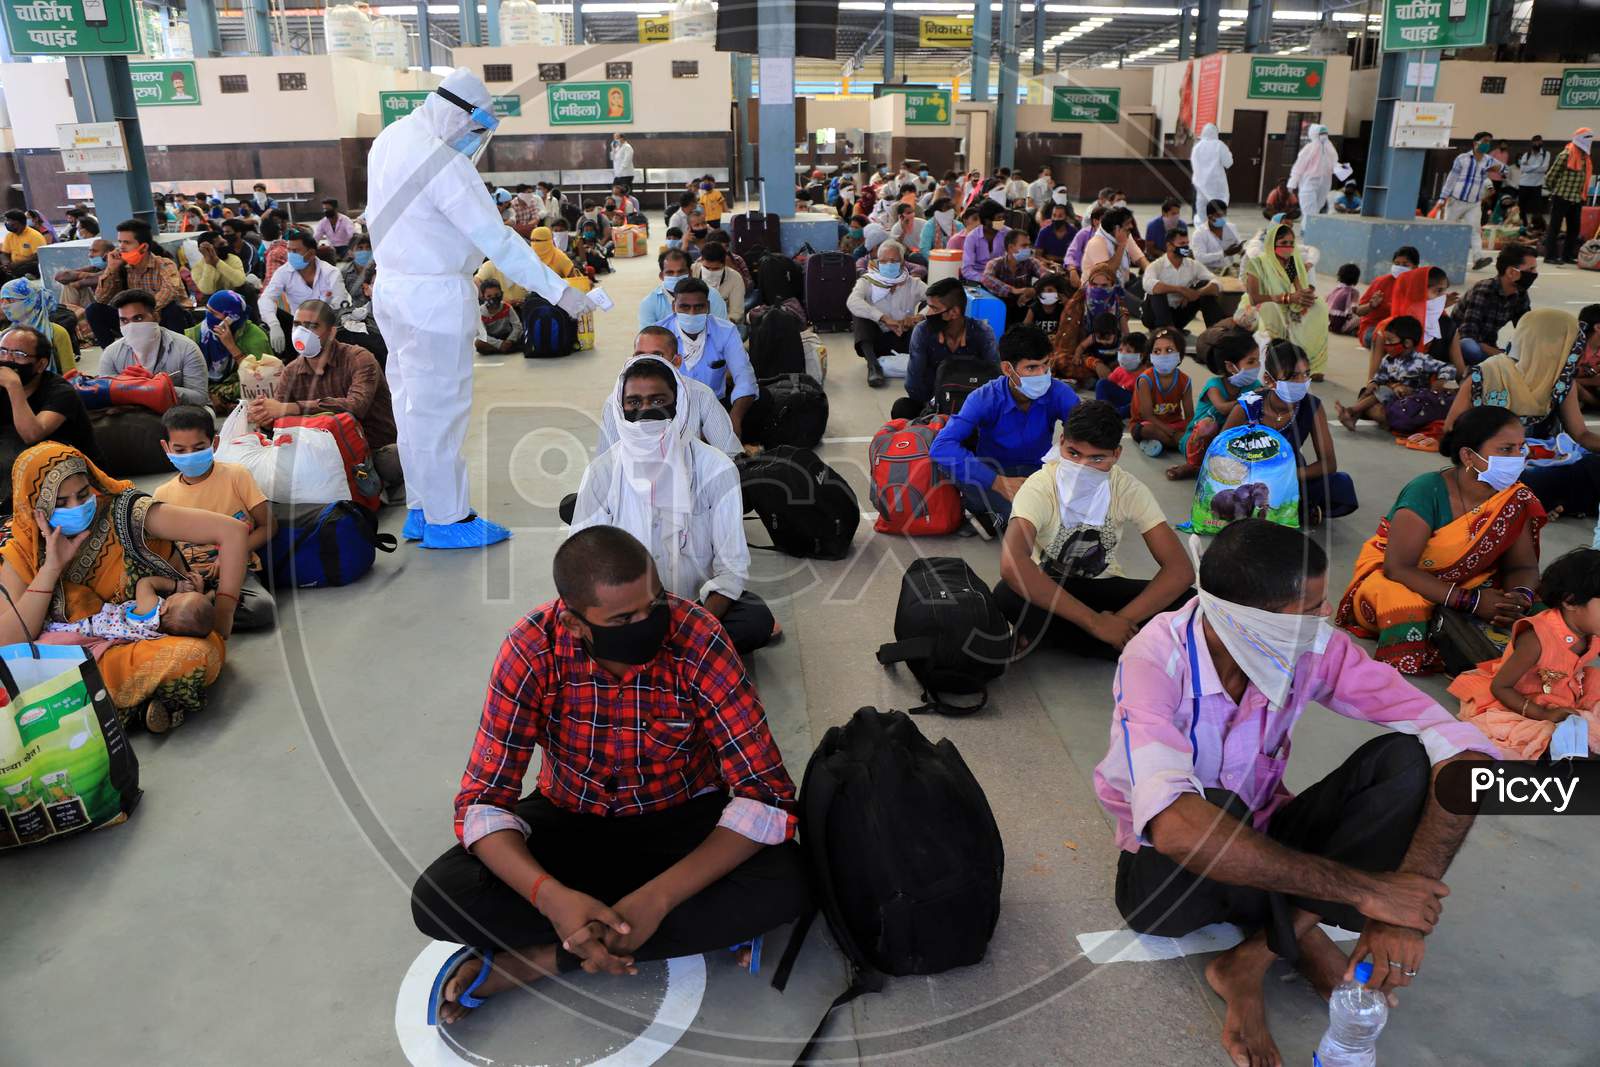 Thermal Screening Conducted For Migrant Workers From Gujarat Who Arrived on A Special Train During Nationwide Lockdown Amidst Coronavirus Or COVID- 19 Pandemic, Prayagraj, May 10, 2020